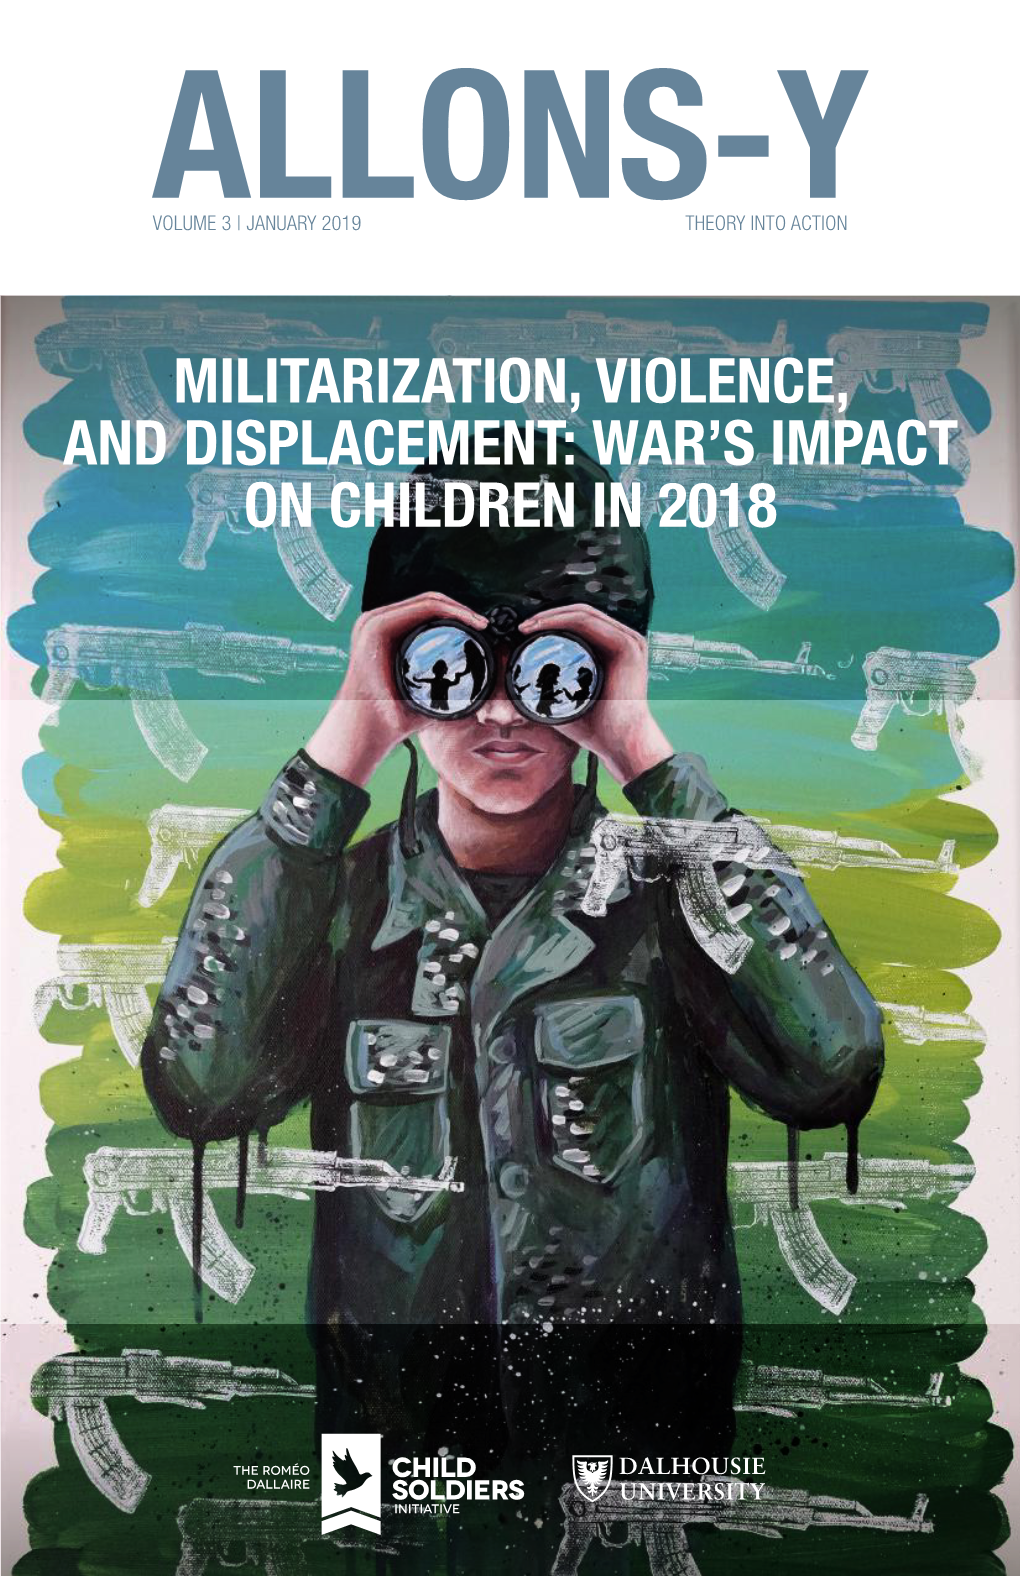 MILITARIZATION, VIOLENCE, and DISPLACEMENT: WAR’S IMPACT on CHILDREN in 2018 ALLONS-Y Volume 3 | January 2019 January ALLONS-Y